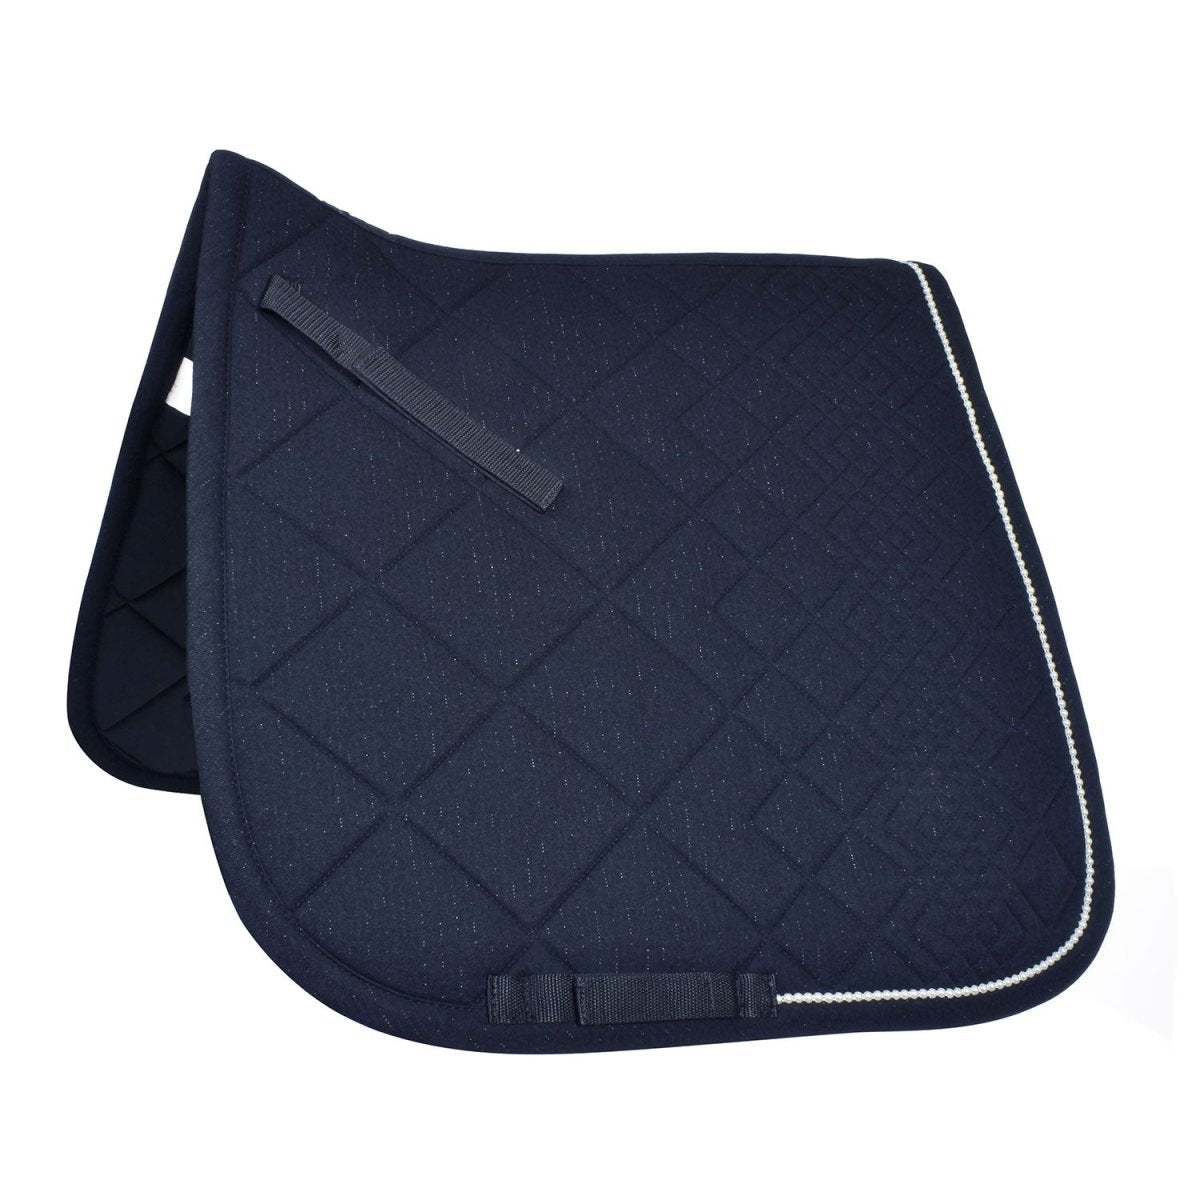 Whitaker Carnaby Dressage Saddle Pad - Navy - Full